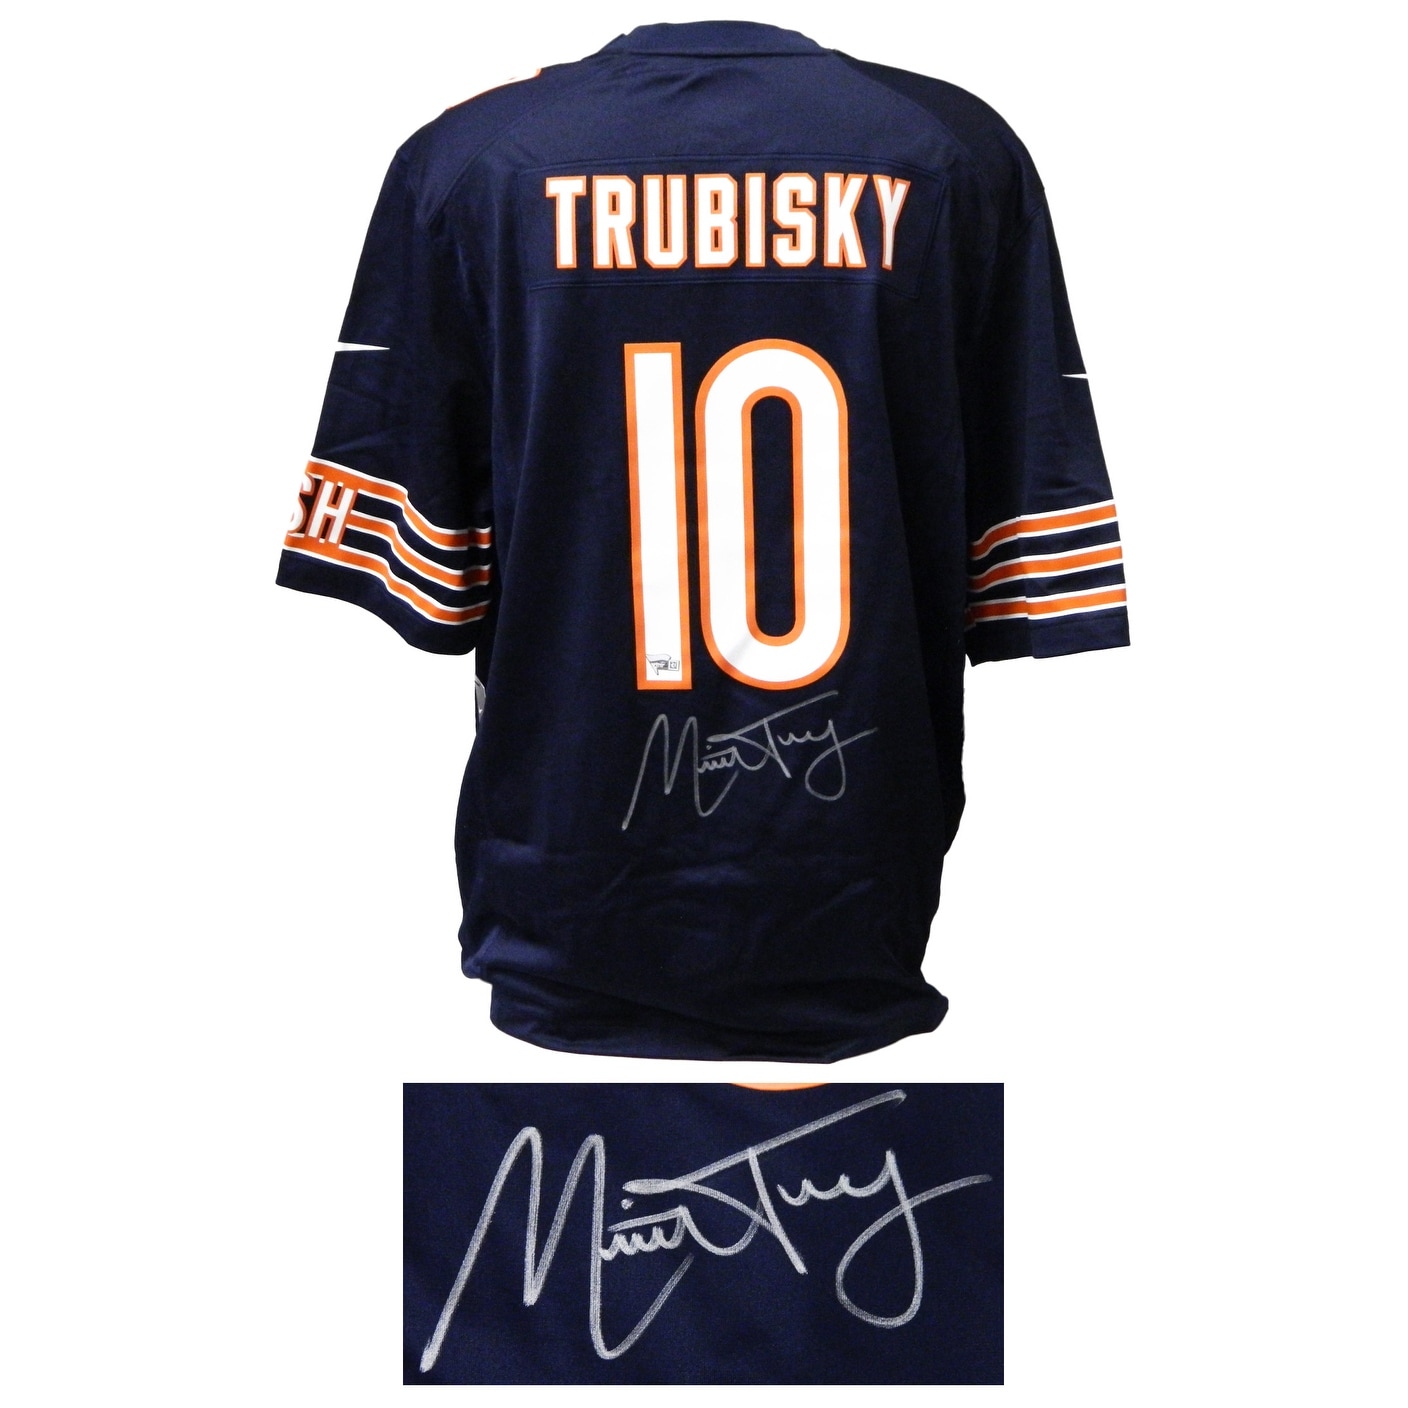 mitchell trubisky signed jersey